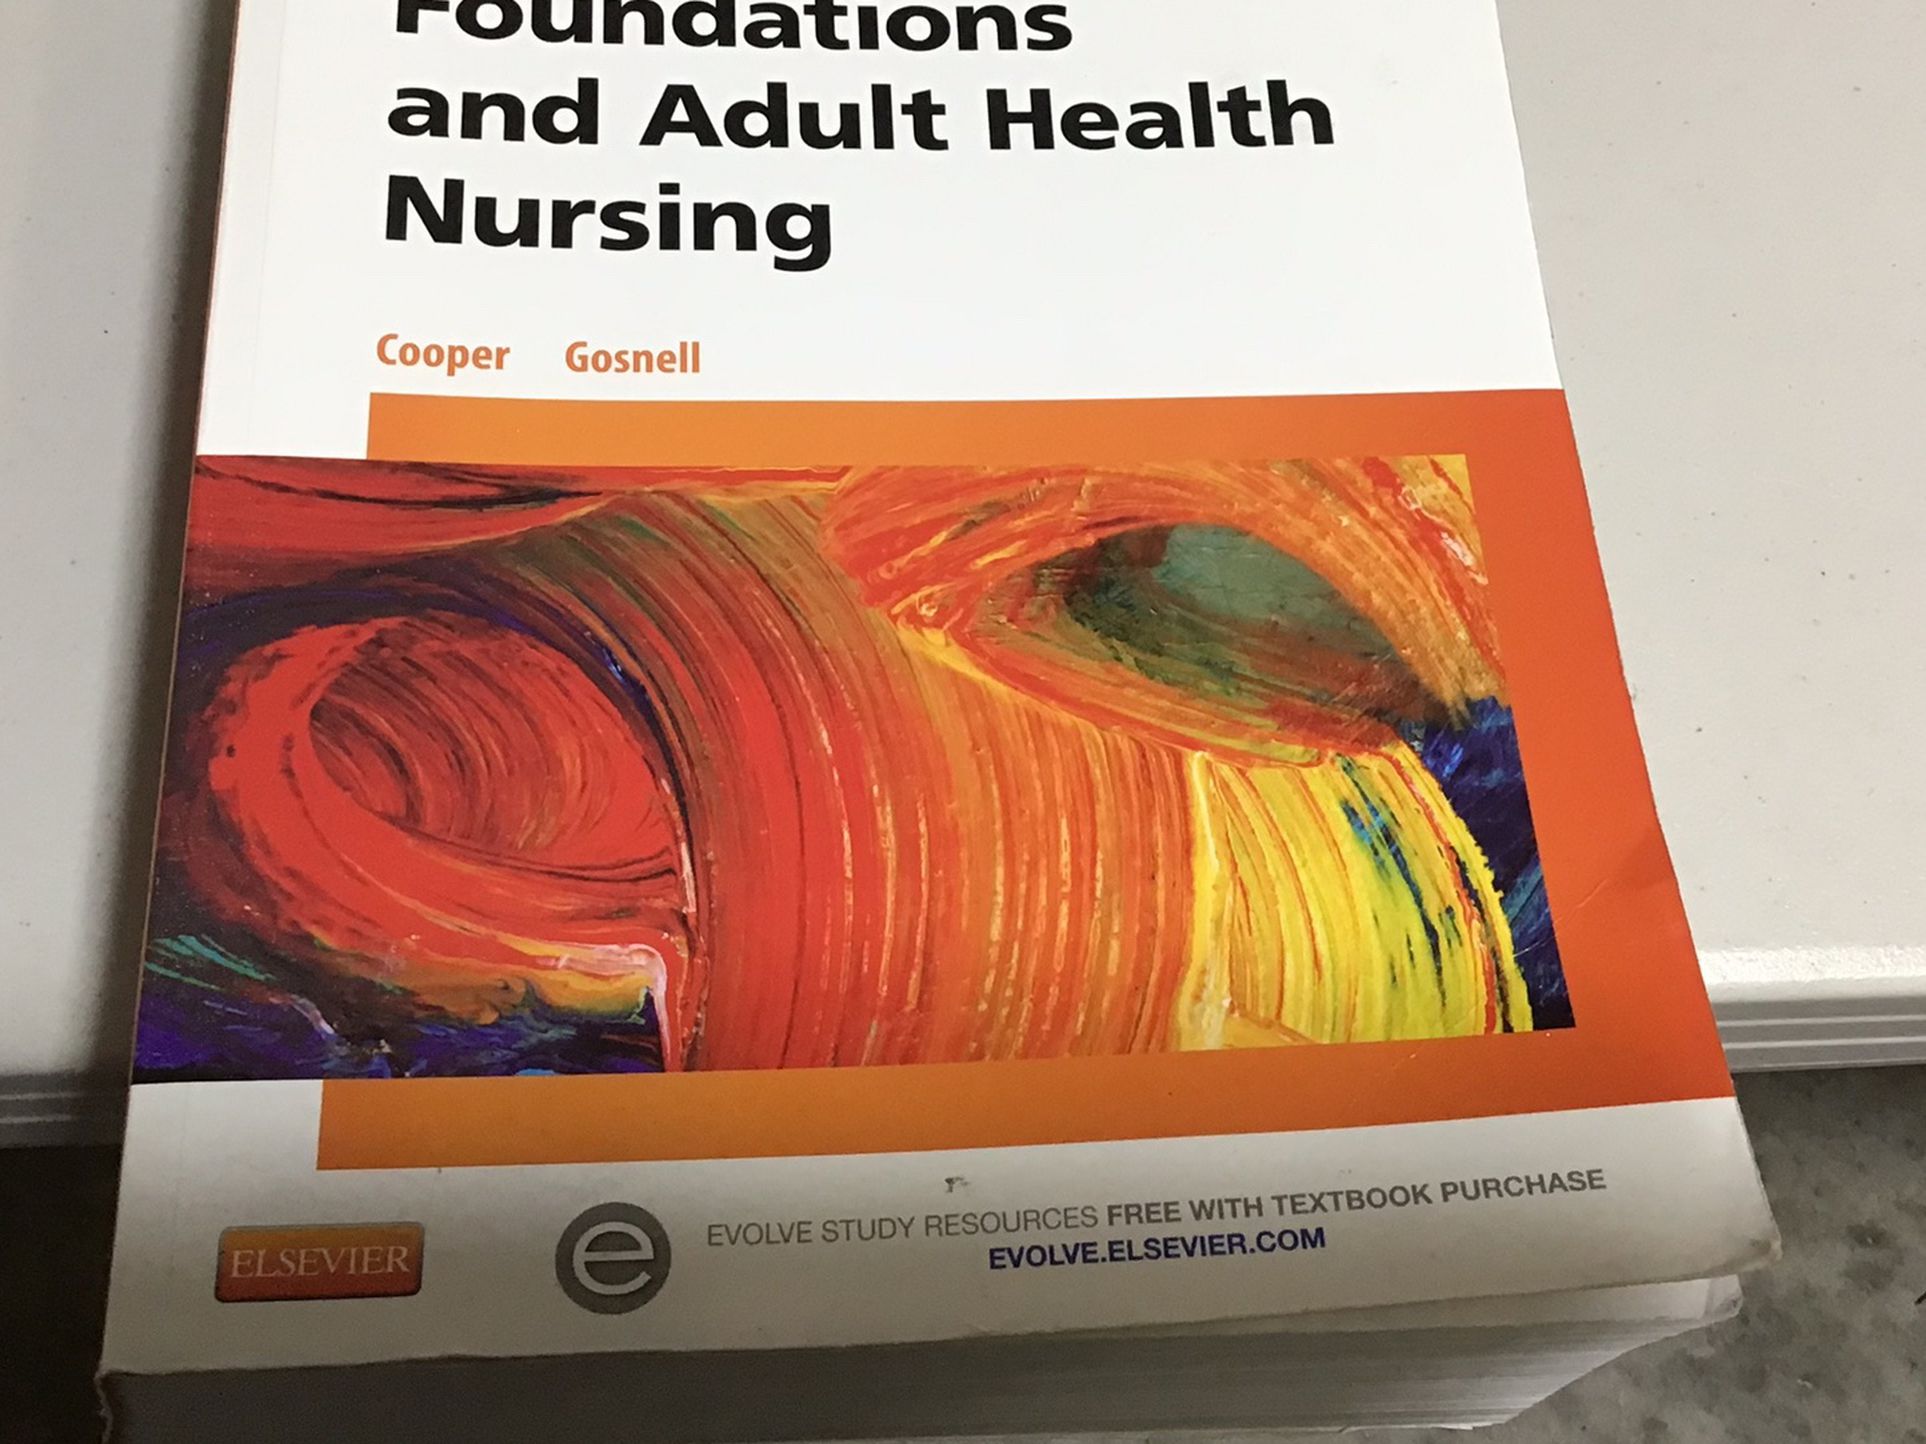 FOUNDATION AND ADULT HEALTH NURSING PAPERBACK 7 EDITION